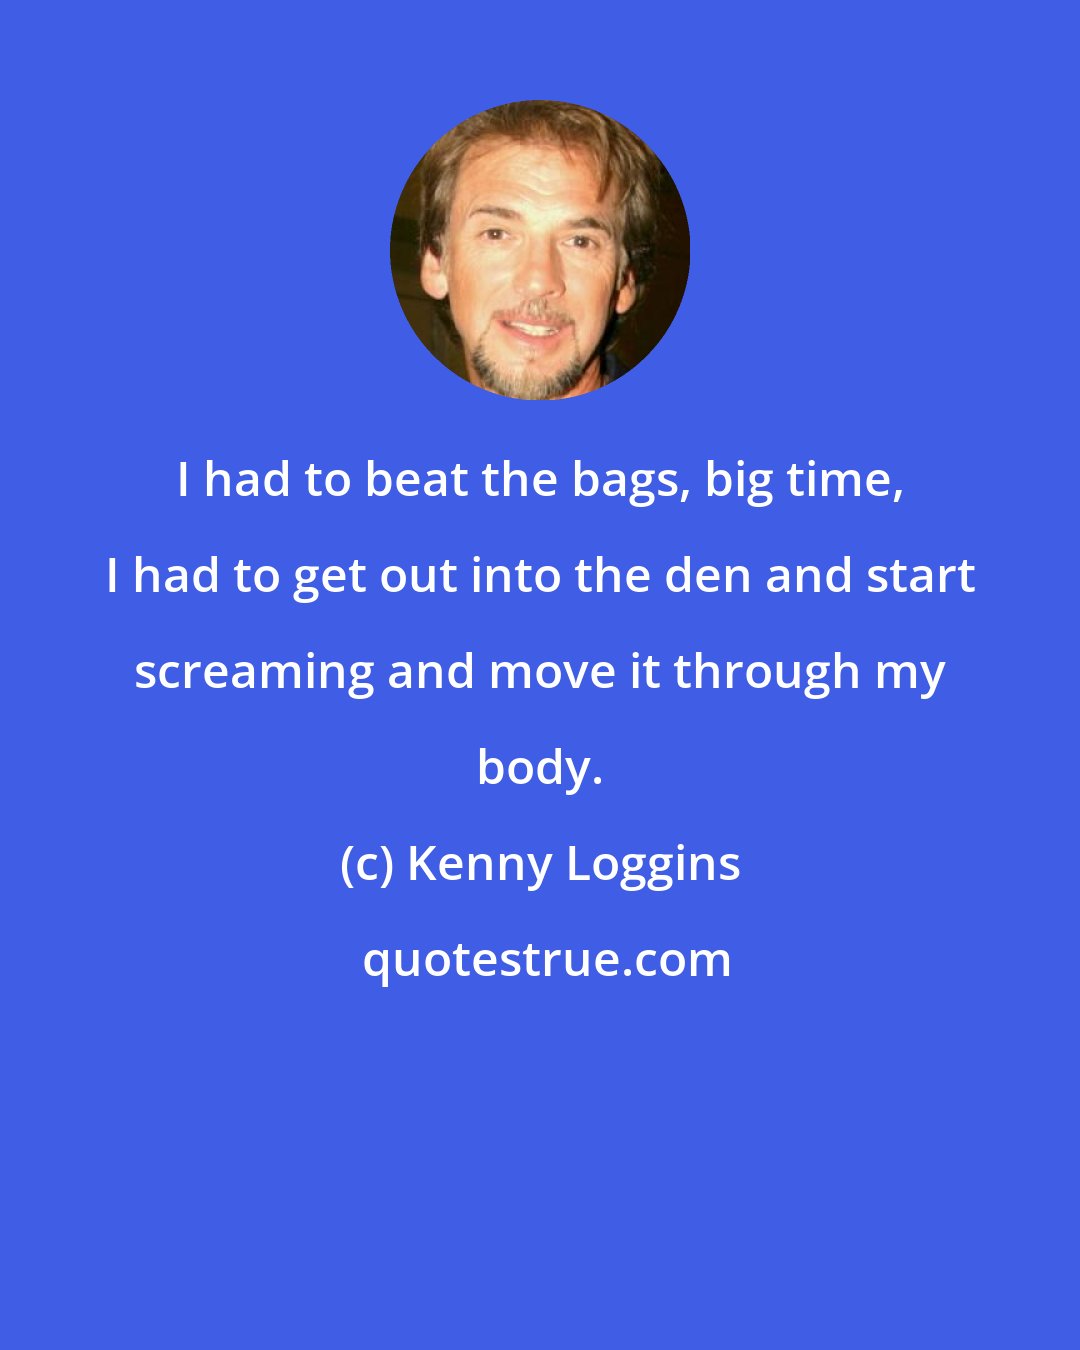 Kenny Loggins: I had to beat the bags, big time, I had to get out into the den and start screaming and move it through my body.